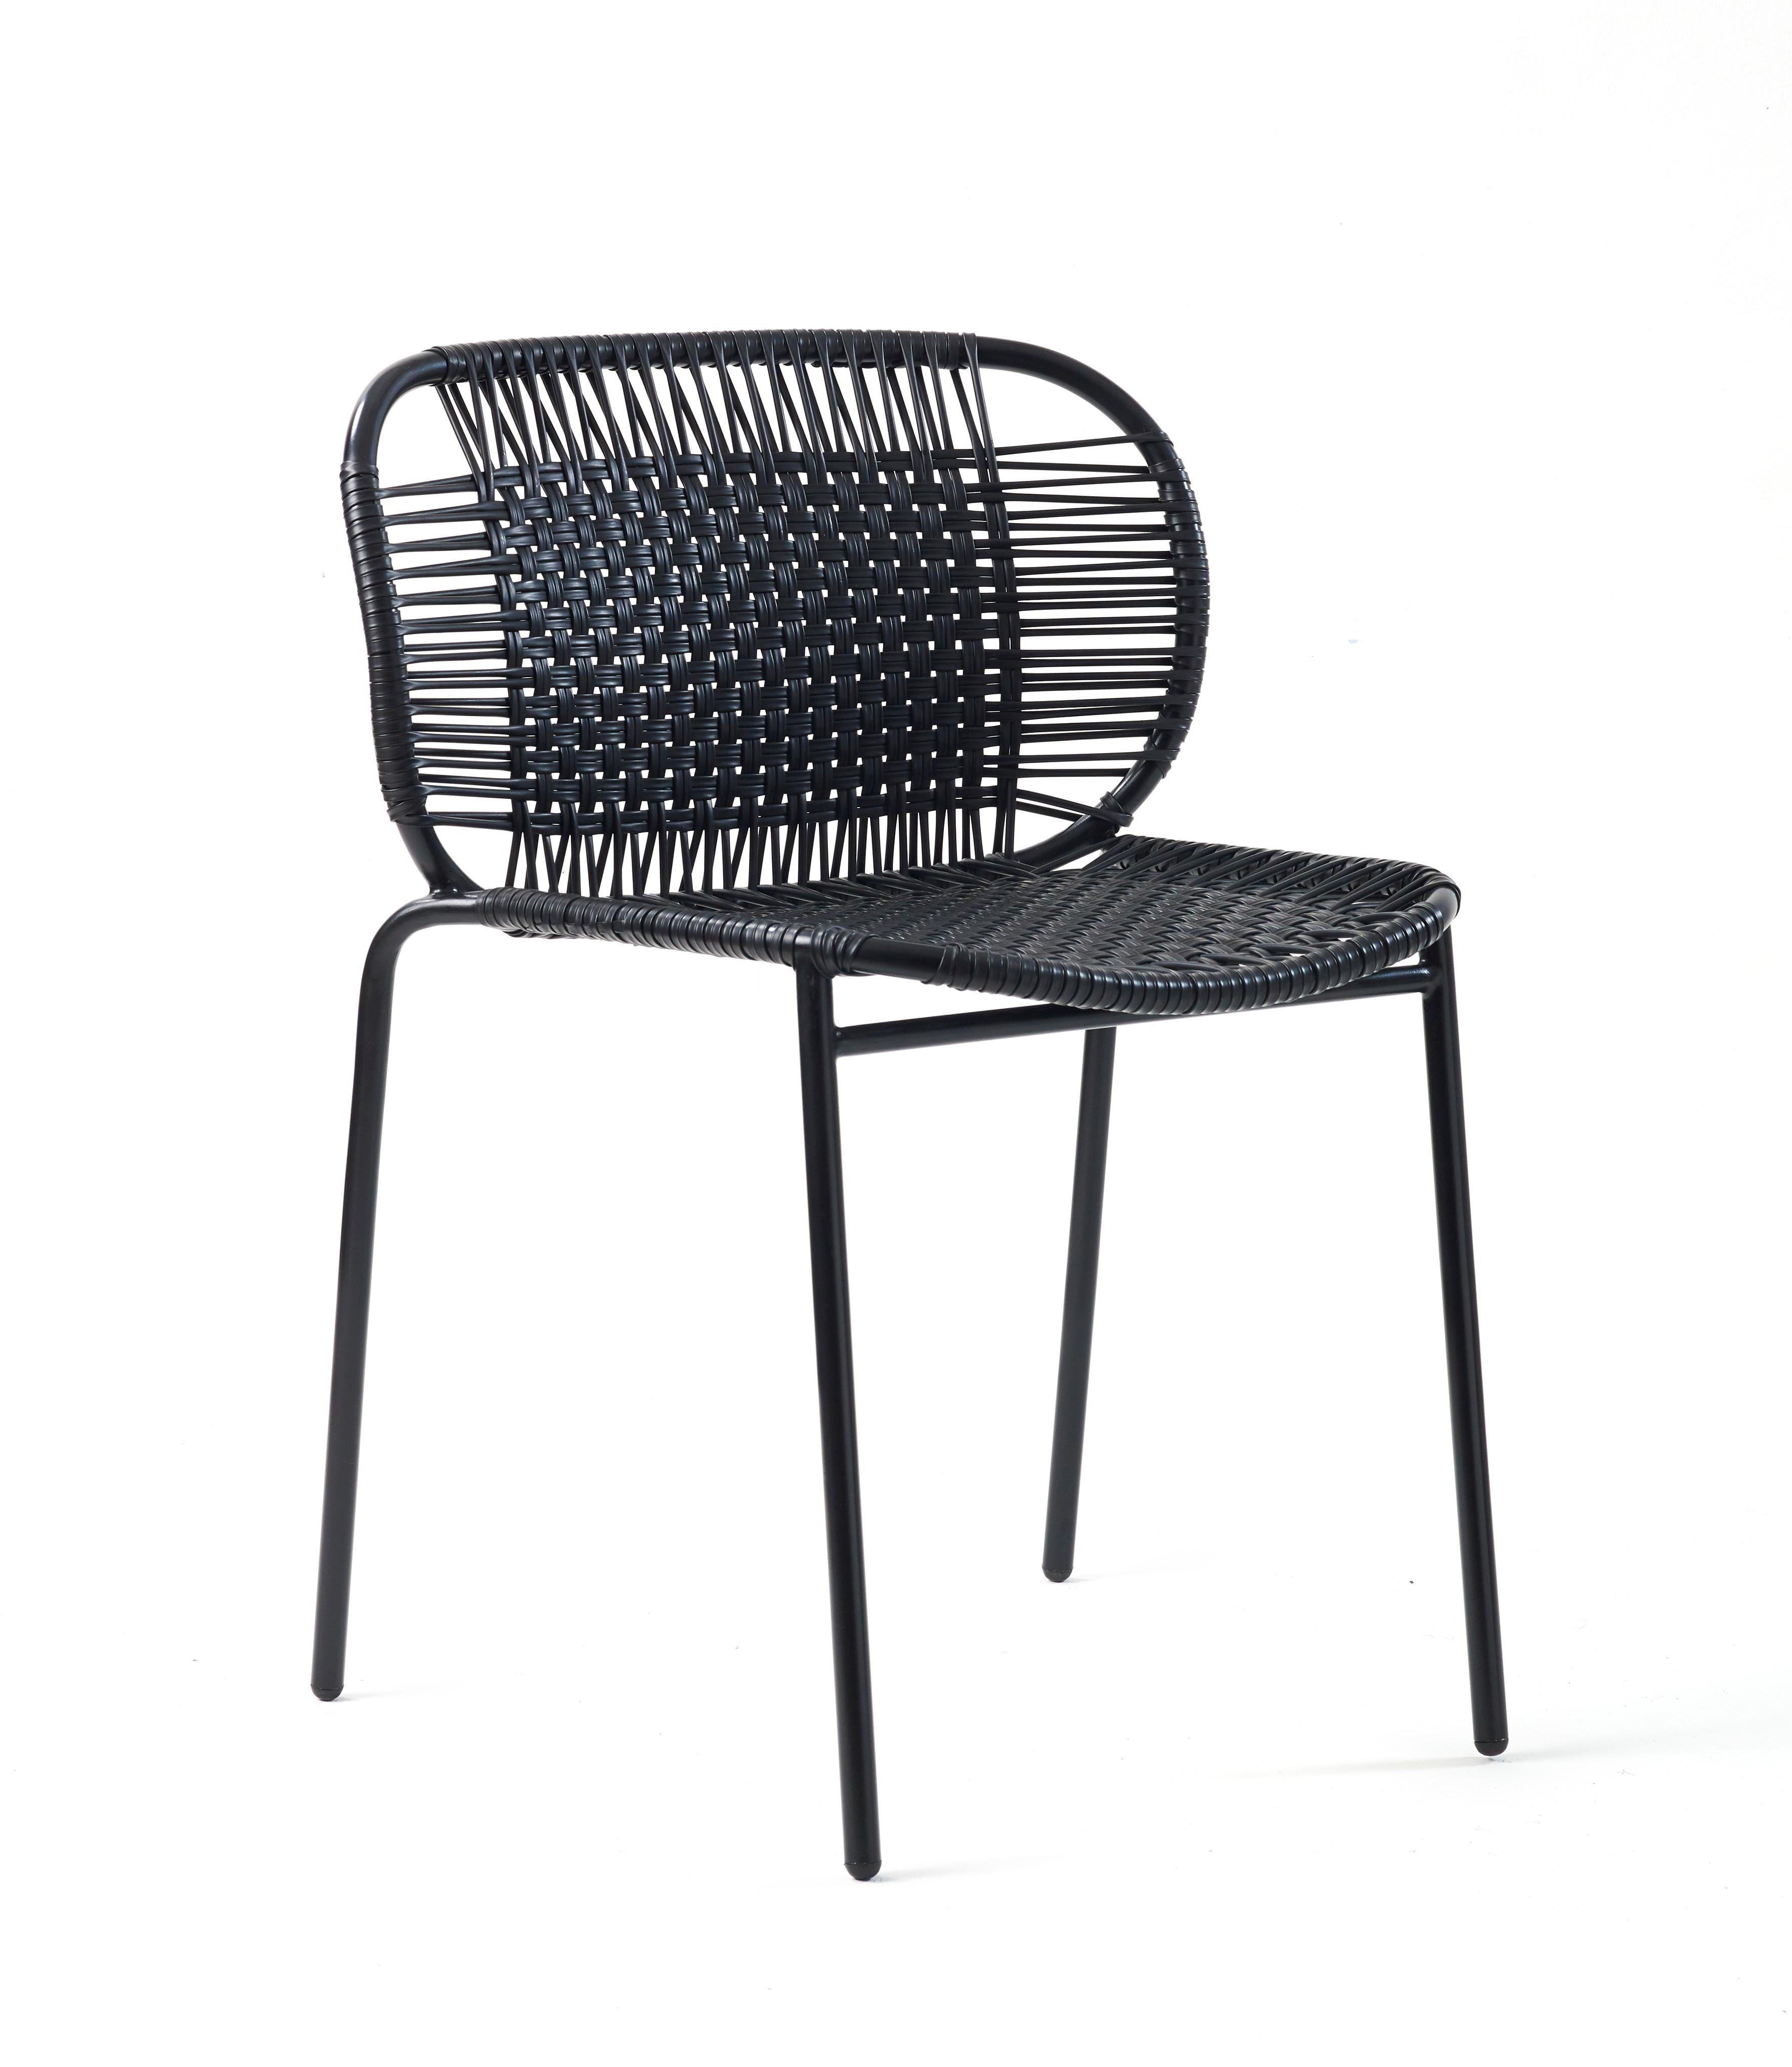 Black Cielo stacking chair by Sebastian Herkner
Materials: PVC strings, powder-coated steel frame. 
Technique: Made from recycled plastic and weaved by local craftspeople in Cartagena, Colombia. 
Dimensions: W 56 x D 51.4 x H 78 cm 
Also